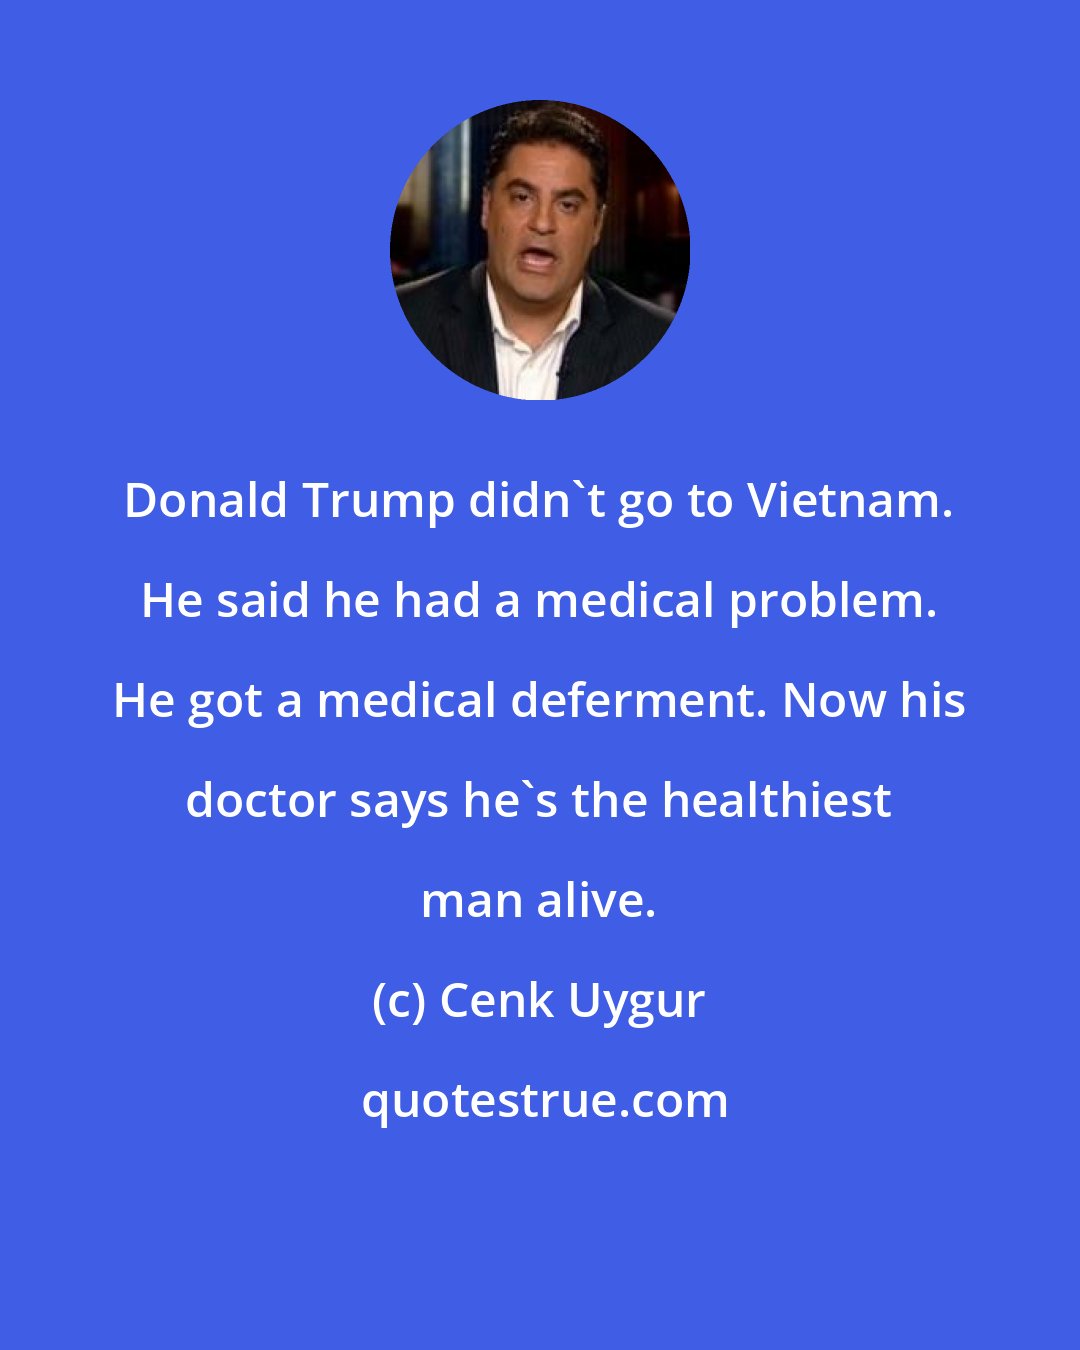 Cenk Uygur: Donald Trump didn't go to Vietnam. He said he had a medical problem. He got a medical deferment. Now his doctor says he's the healthiest man alive.